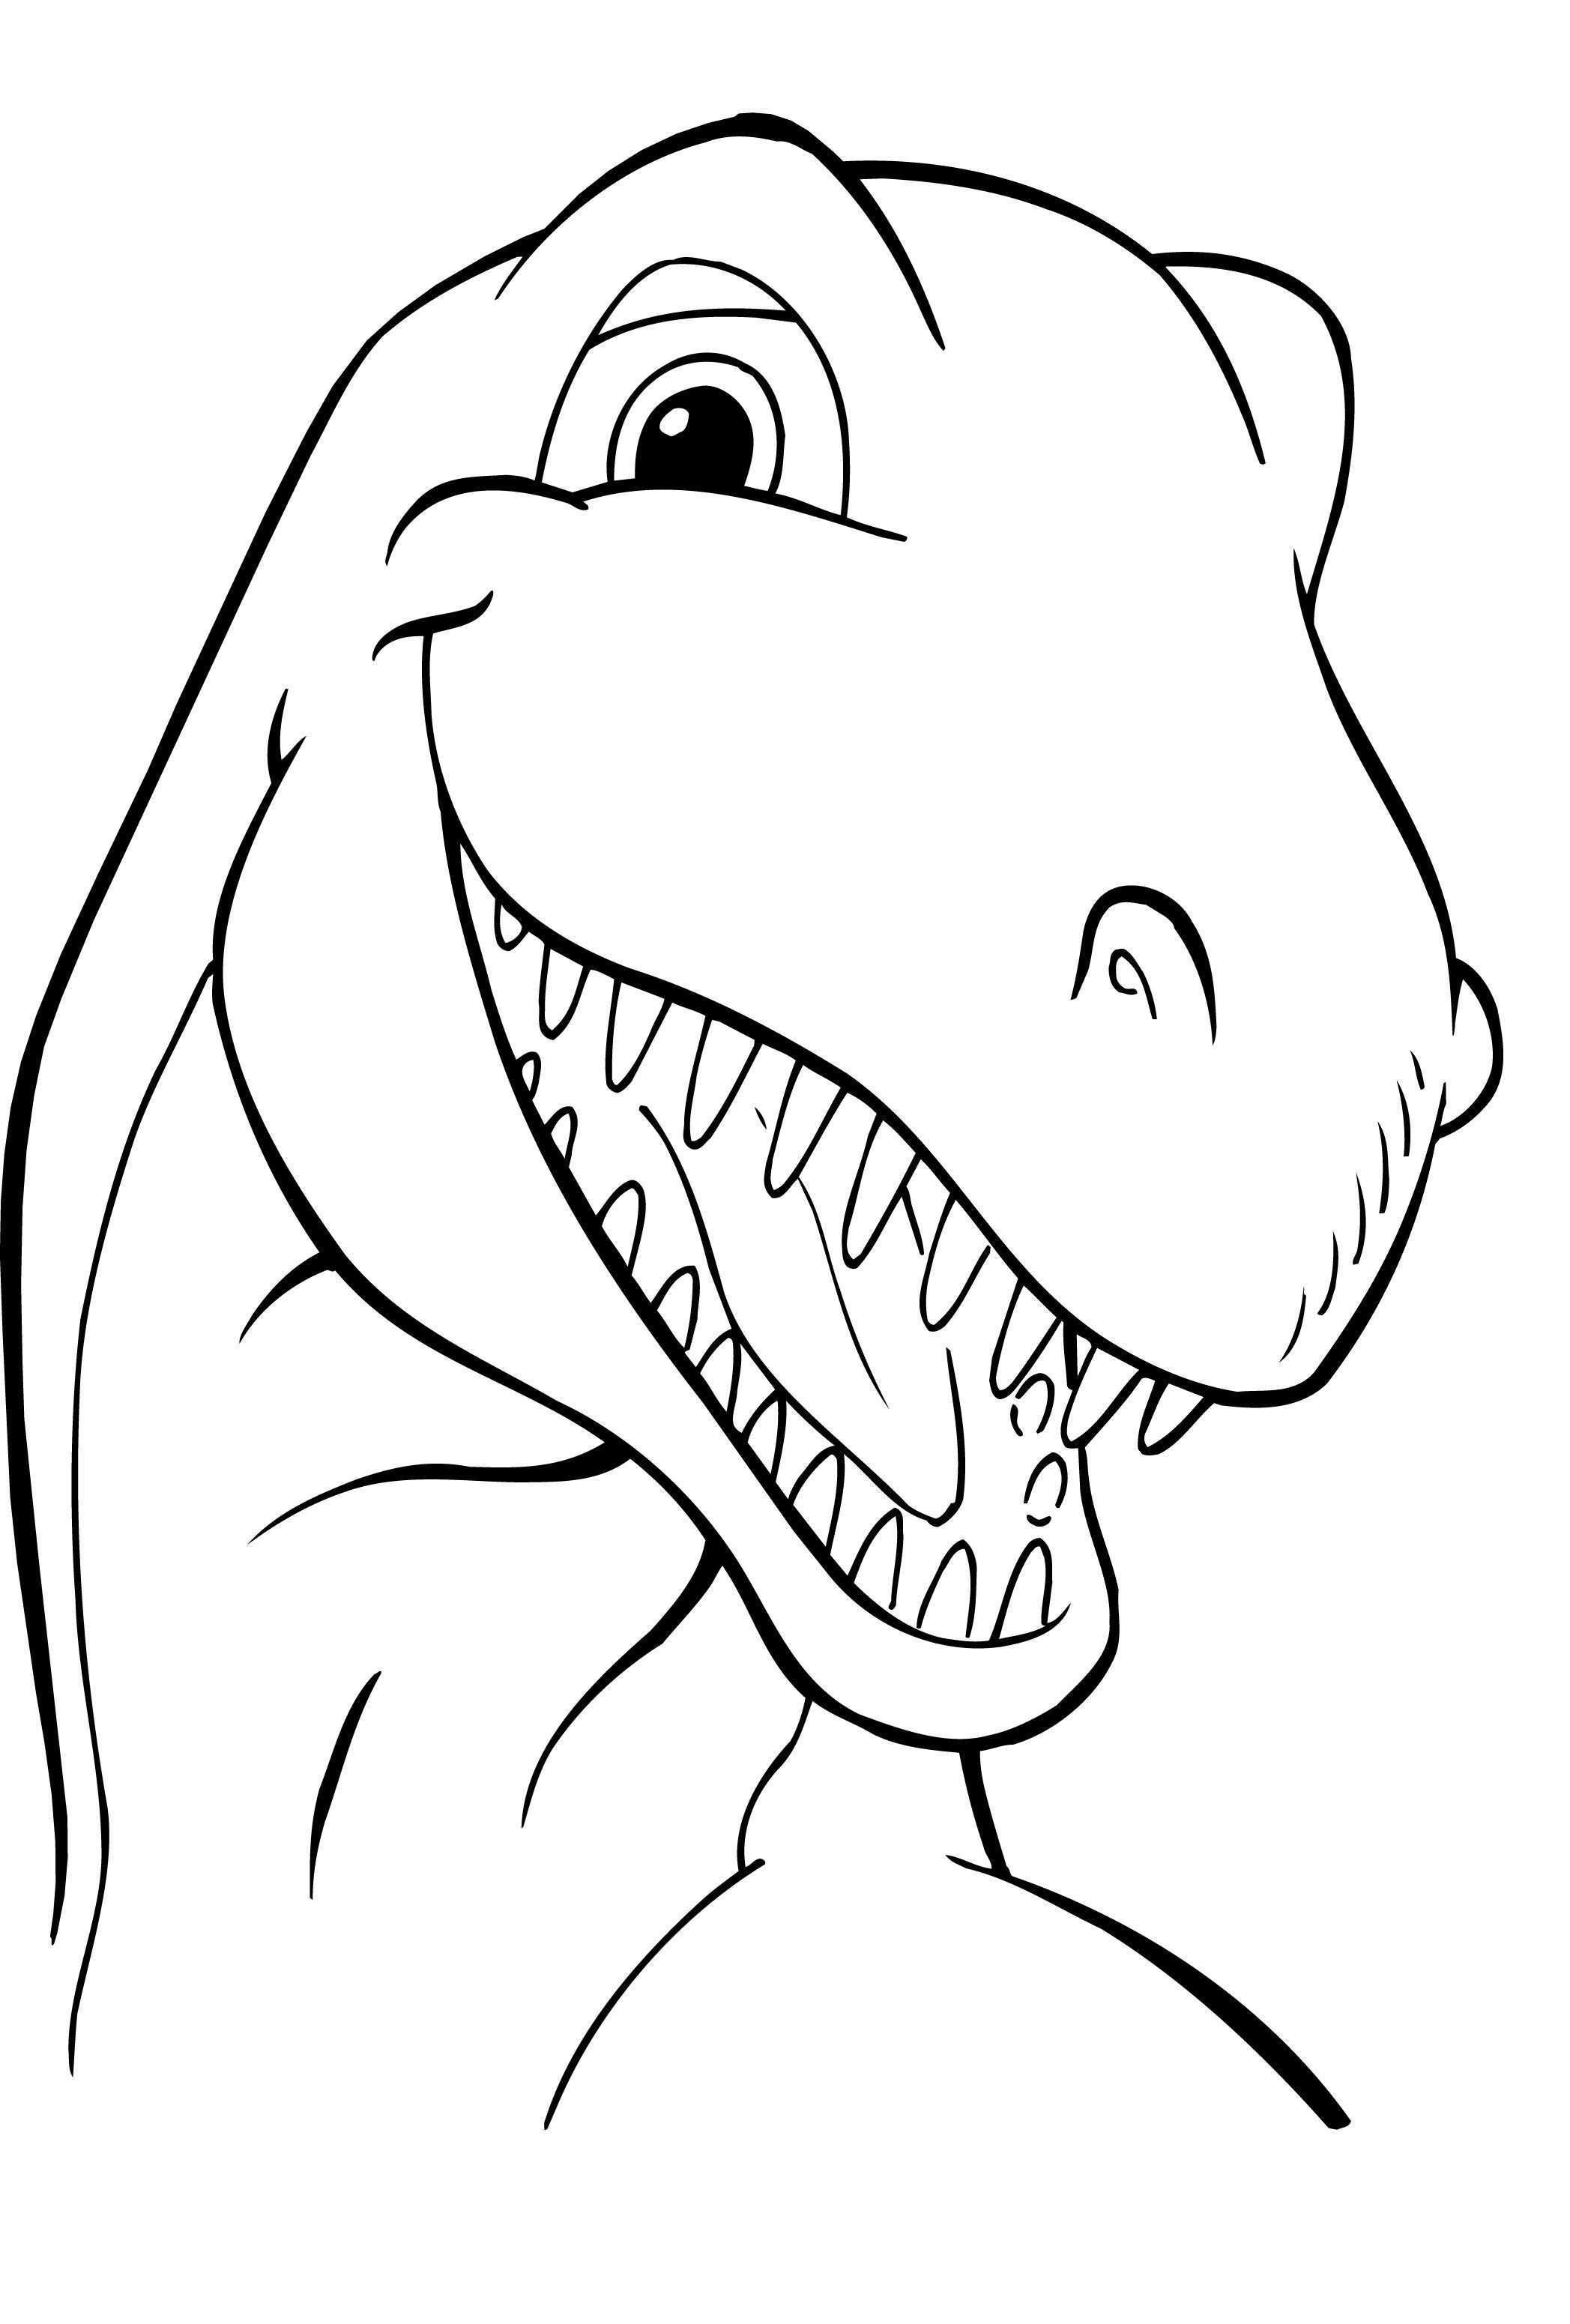 Free Printable Dinosaur Coloring Pages For Kids Dinosaur Coloring Pages Dinosaur Colo